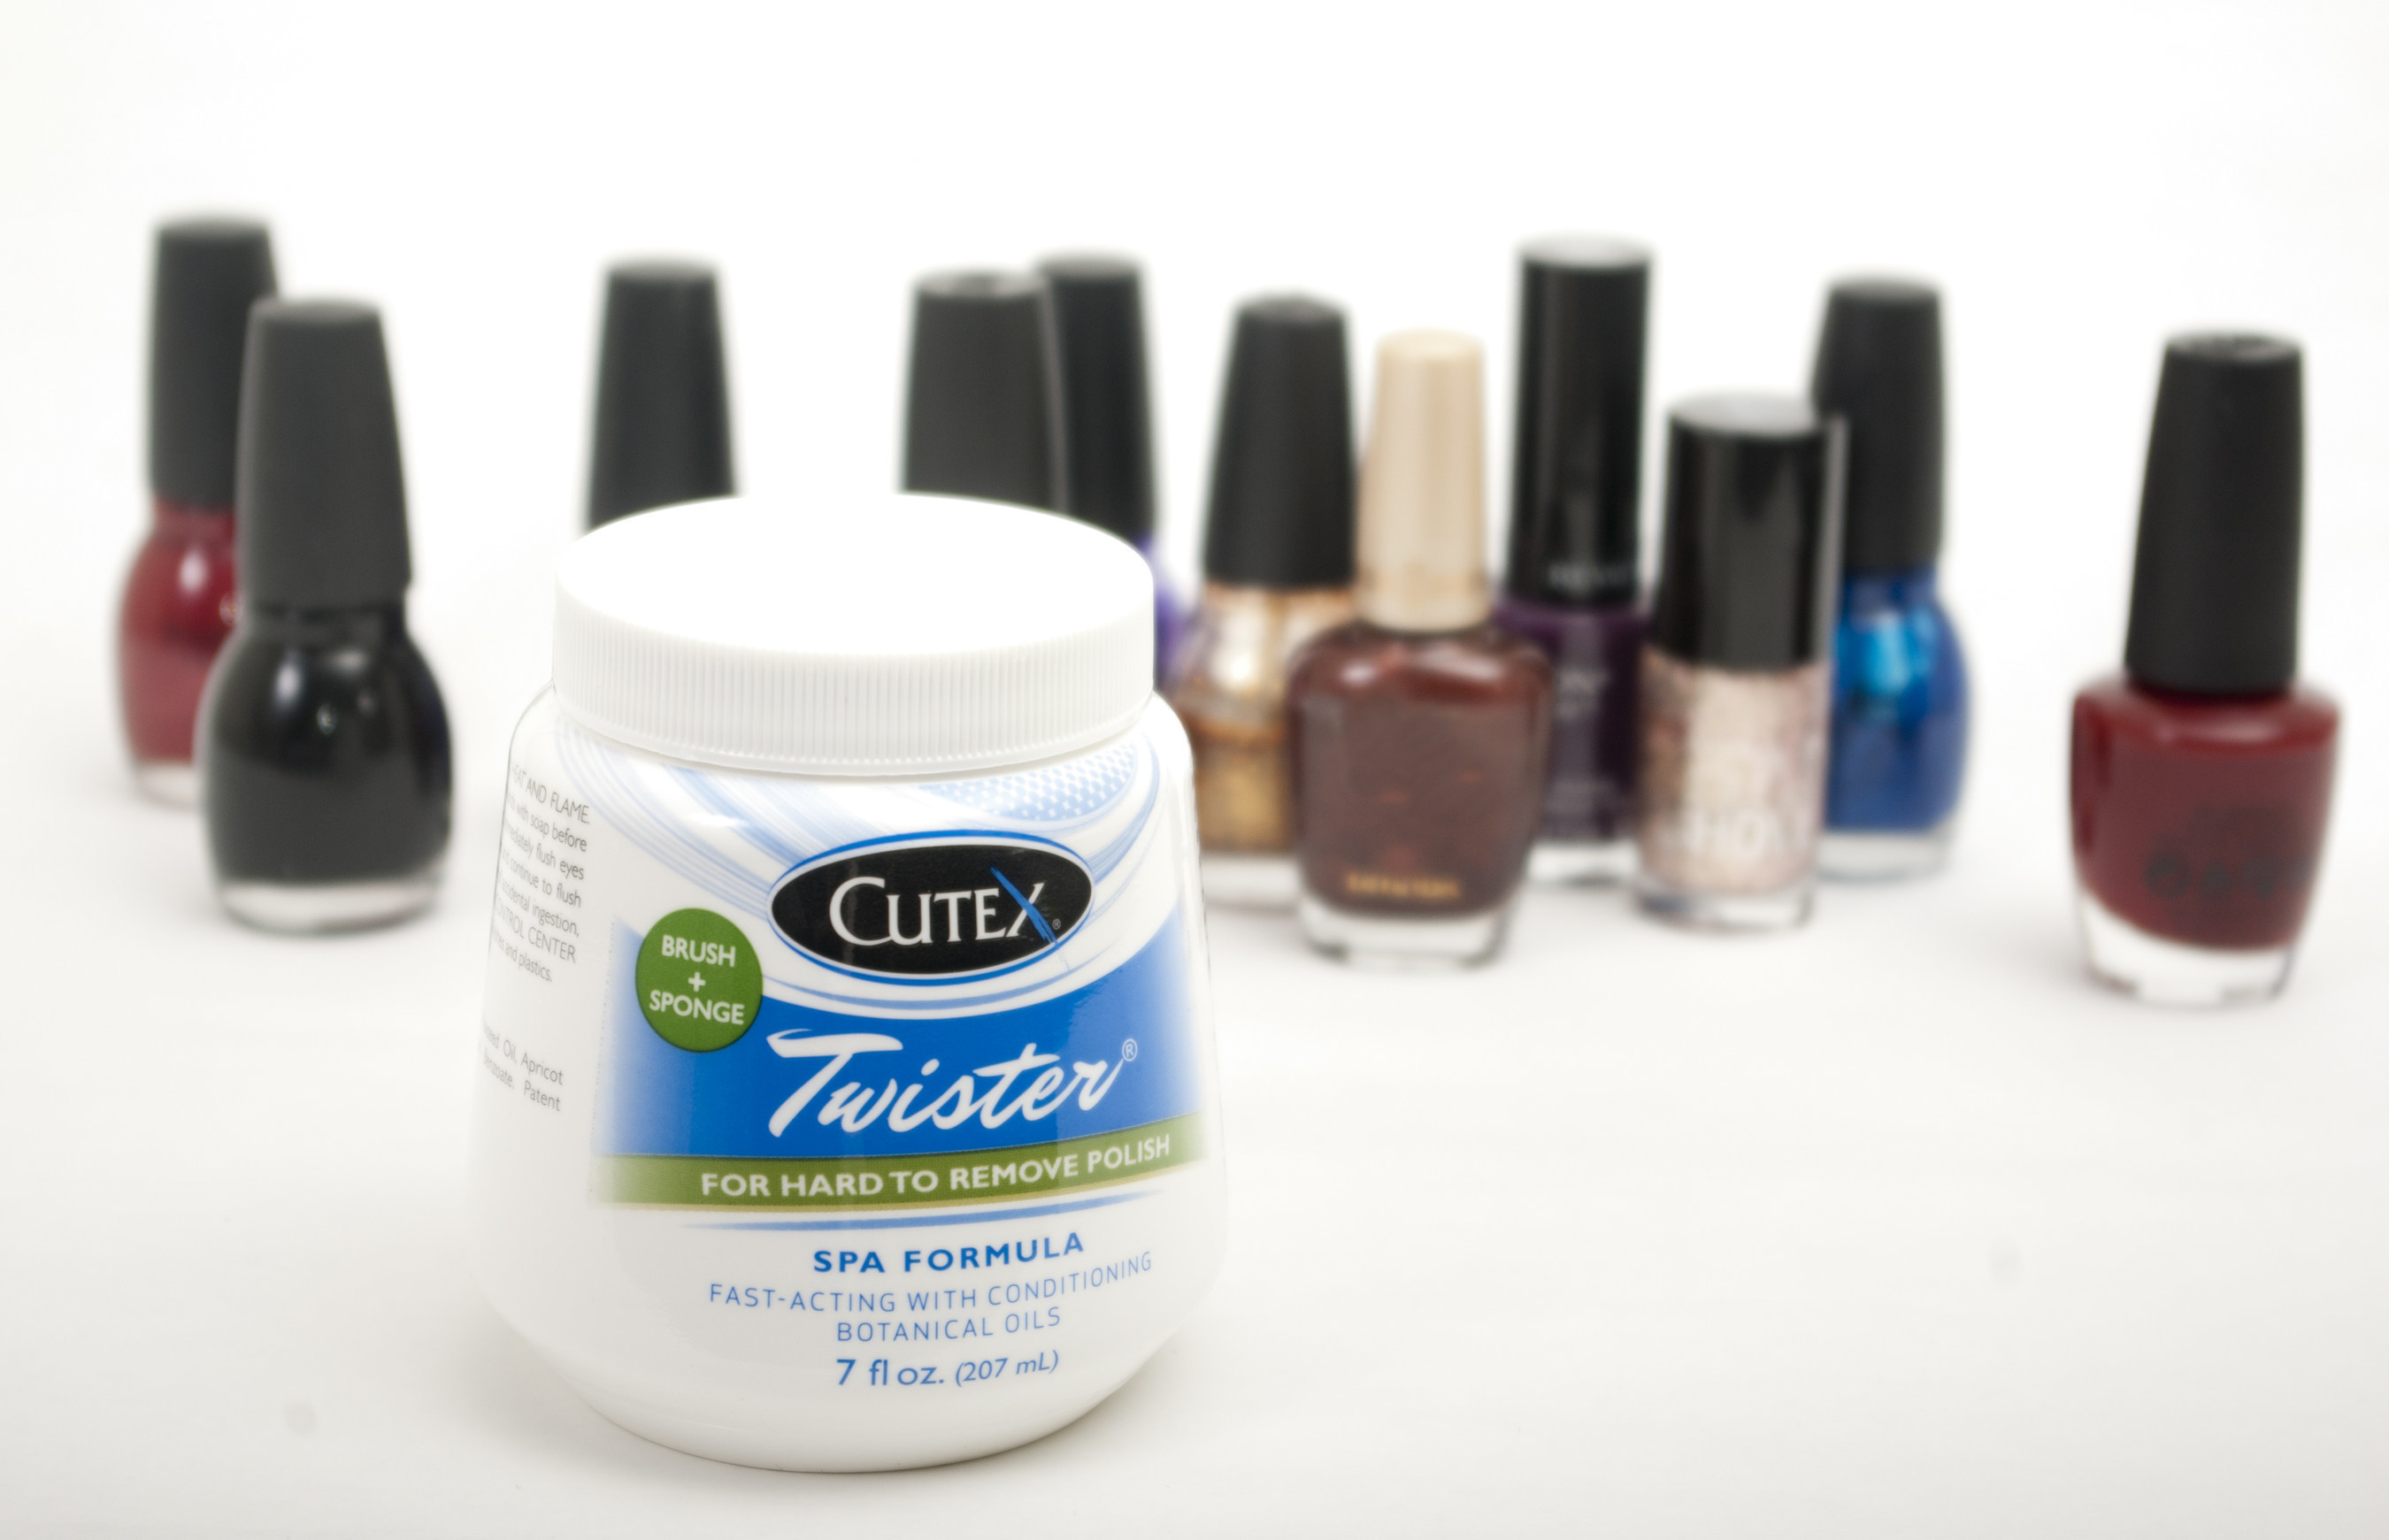 Twister is the perfect solution for nail polish users who are frustrated with the mess and hassle of using multiple cotton balls or tissues to remove dark and glitter nail polish.